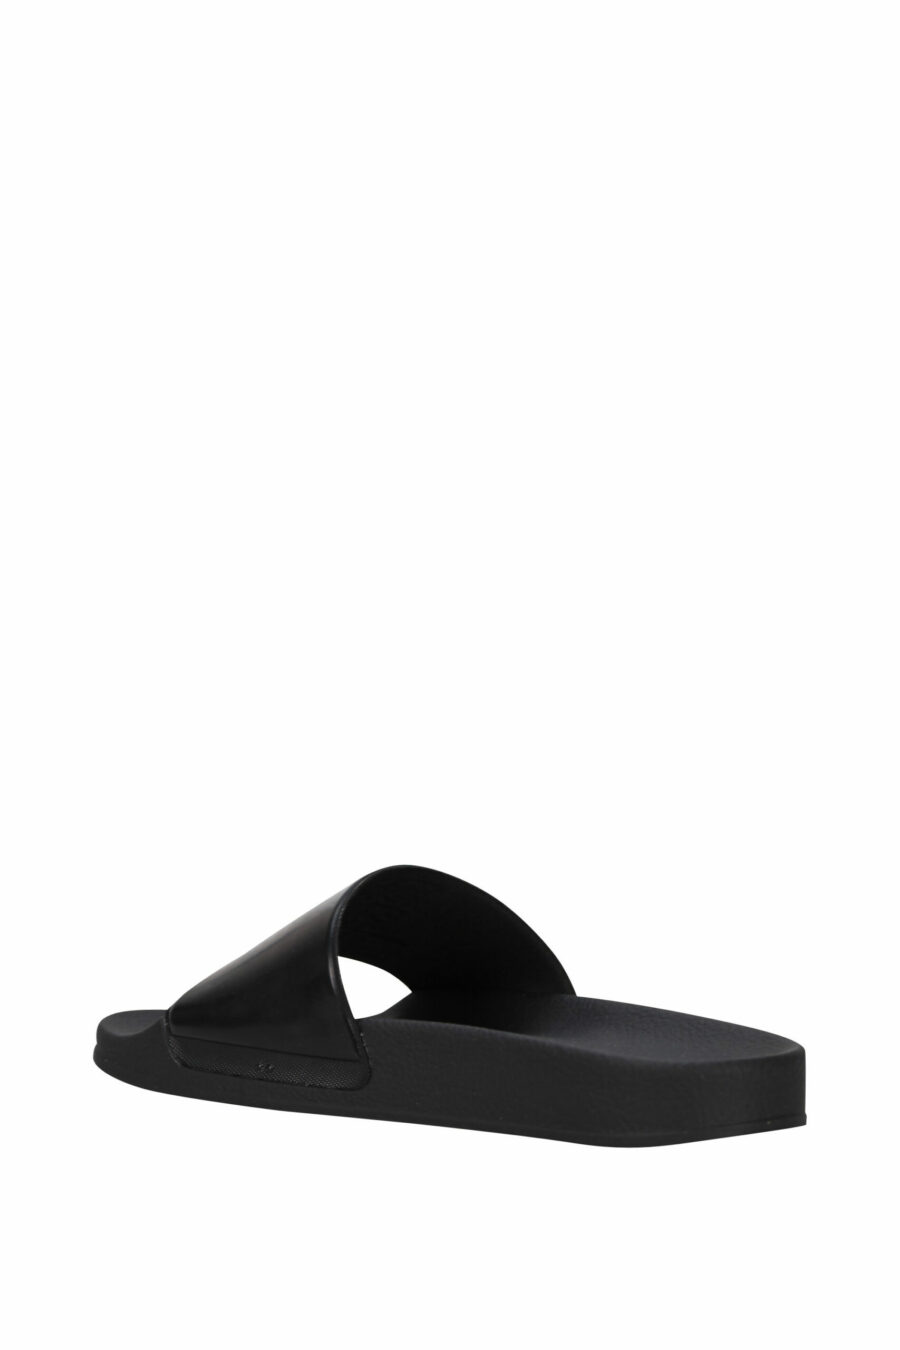 Black flip flops with logo "100% pure moschino" - 8054388527972 3 scaled